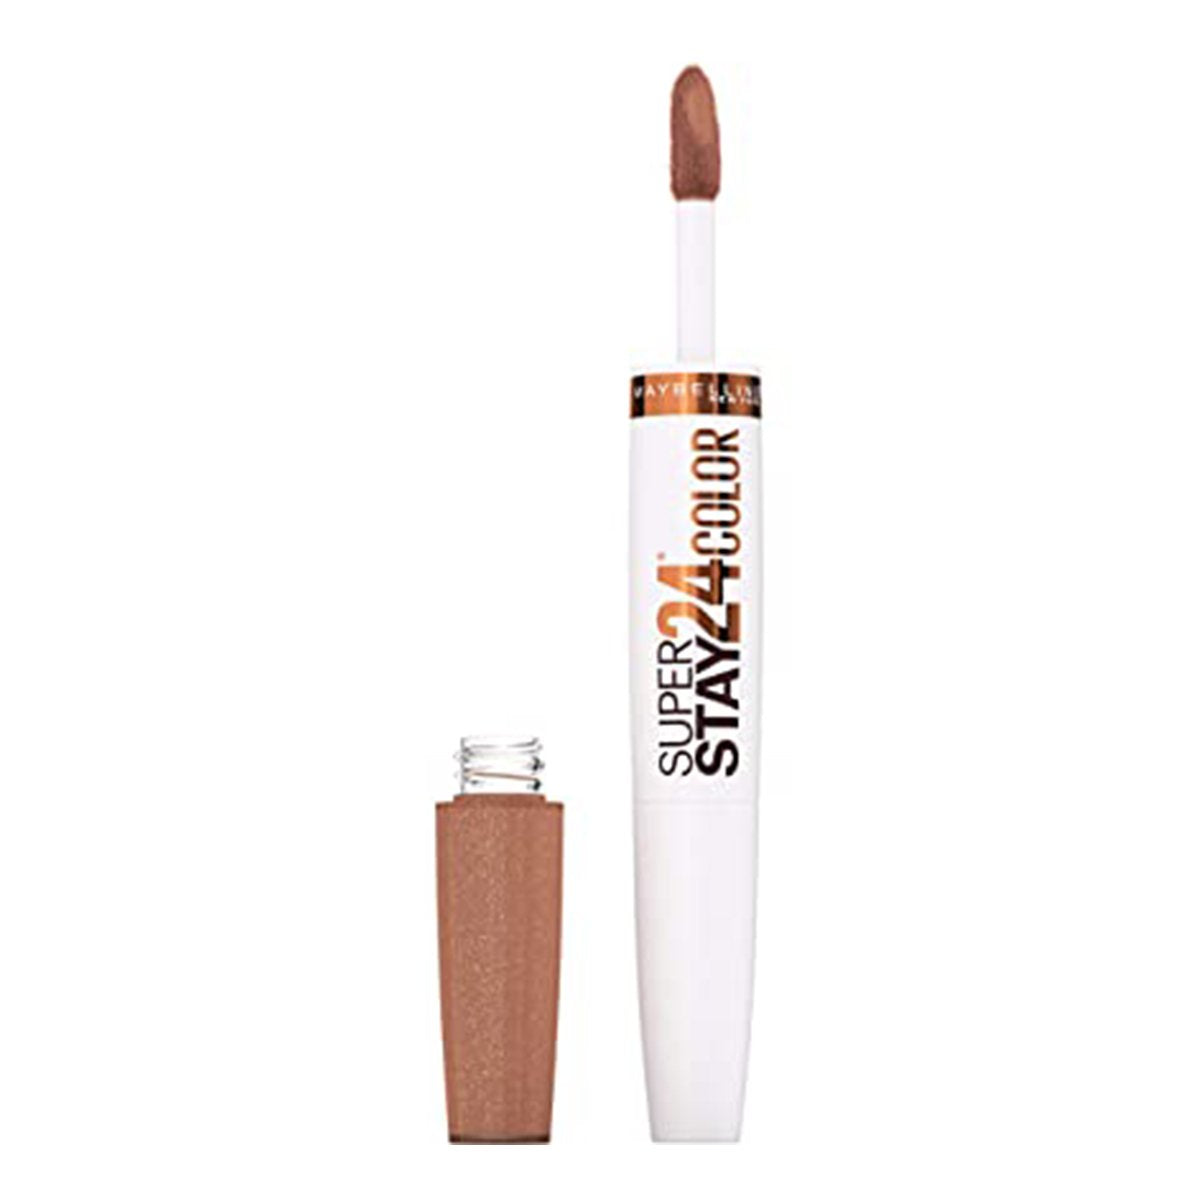 SUPERSTAY 24 2 STEP LIQUID LIPSTICK COFFEE EDITION CHAI ONCE MORE - MAYBELLINE